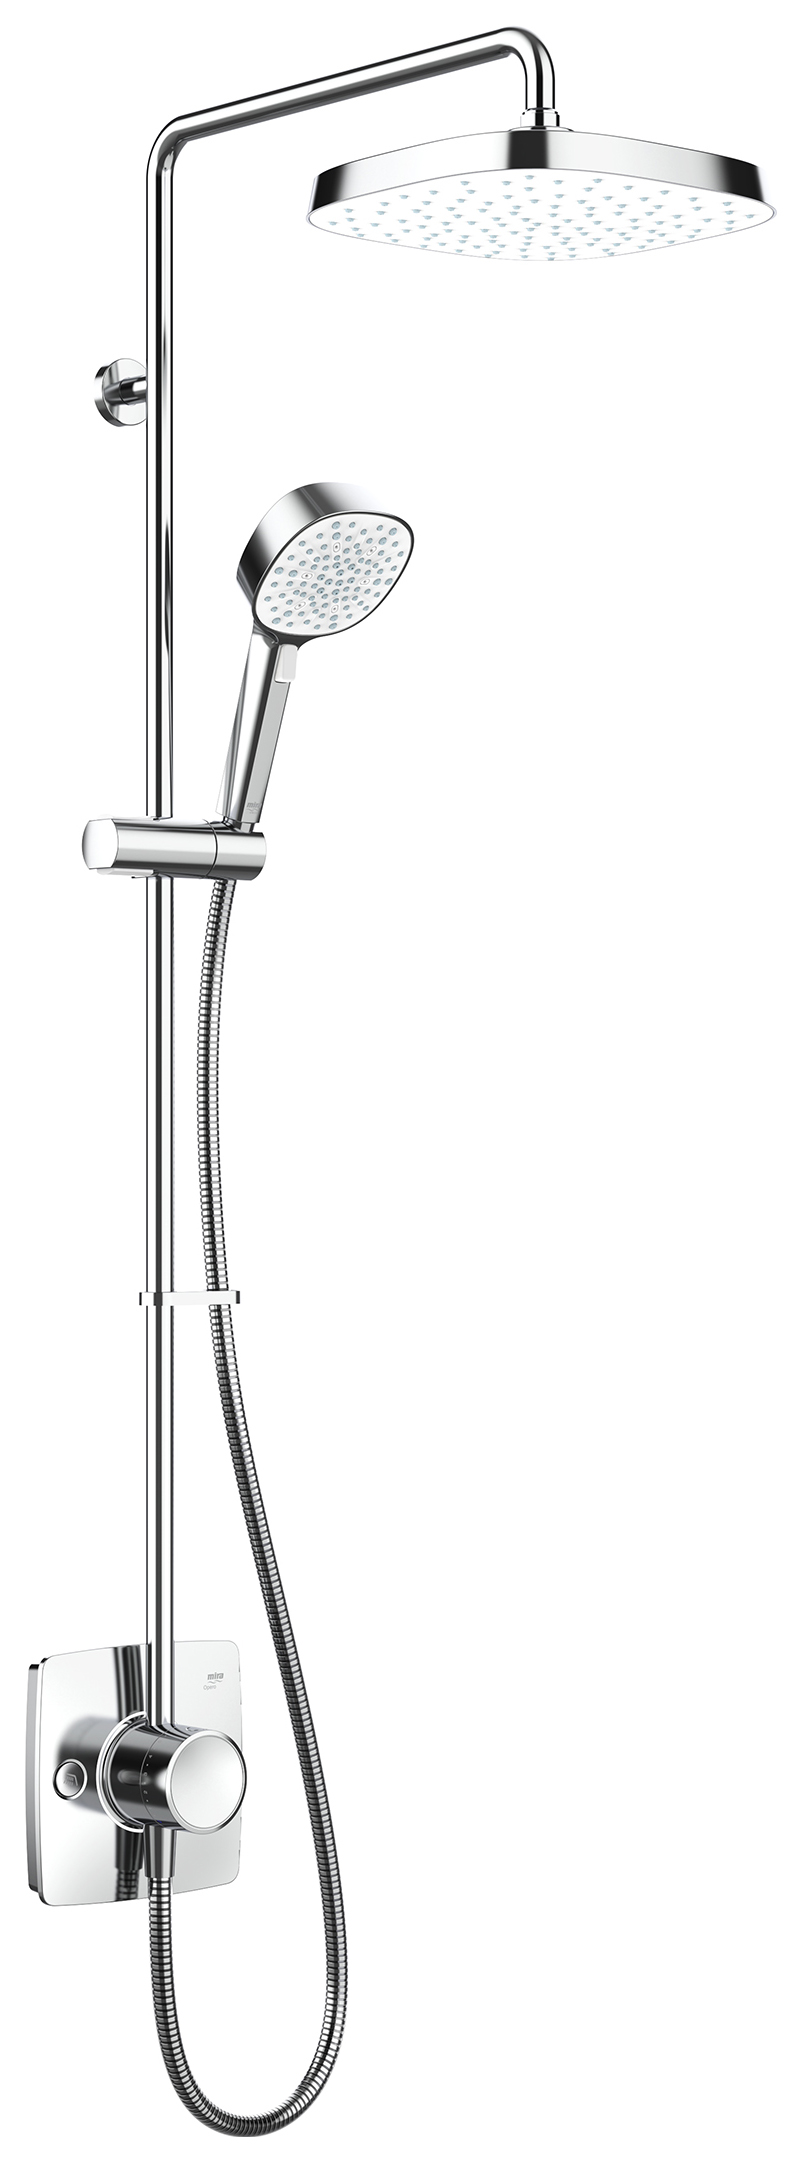 Mira Opero Dual Outlet Mixer Shower with HydroGlo Technology - Chrome